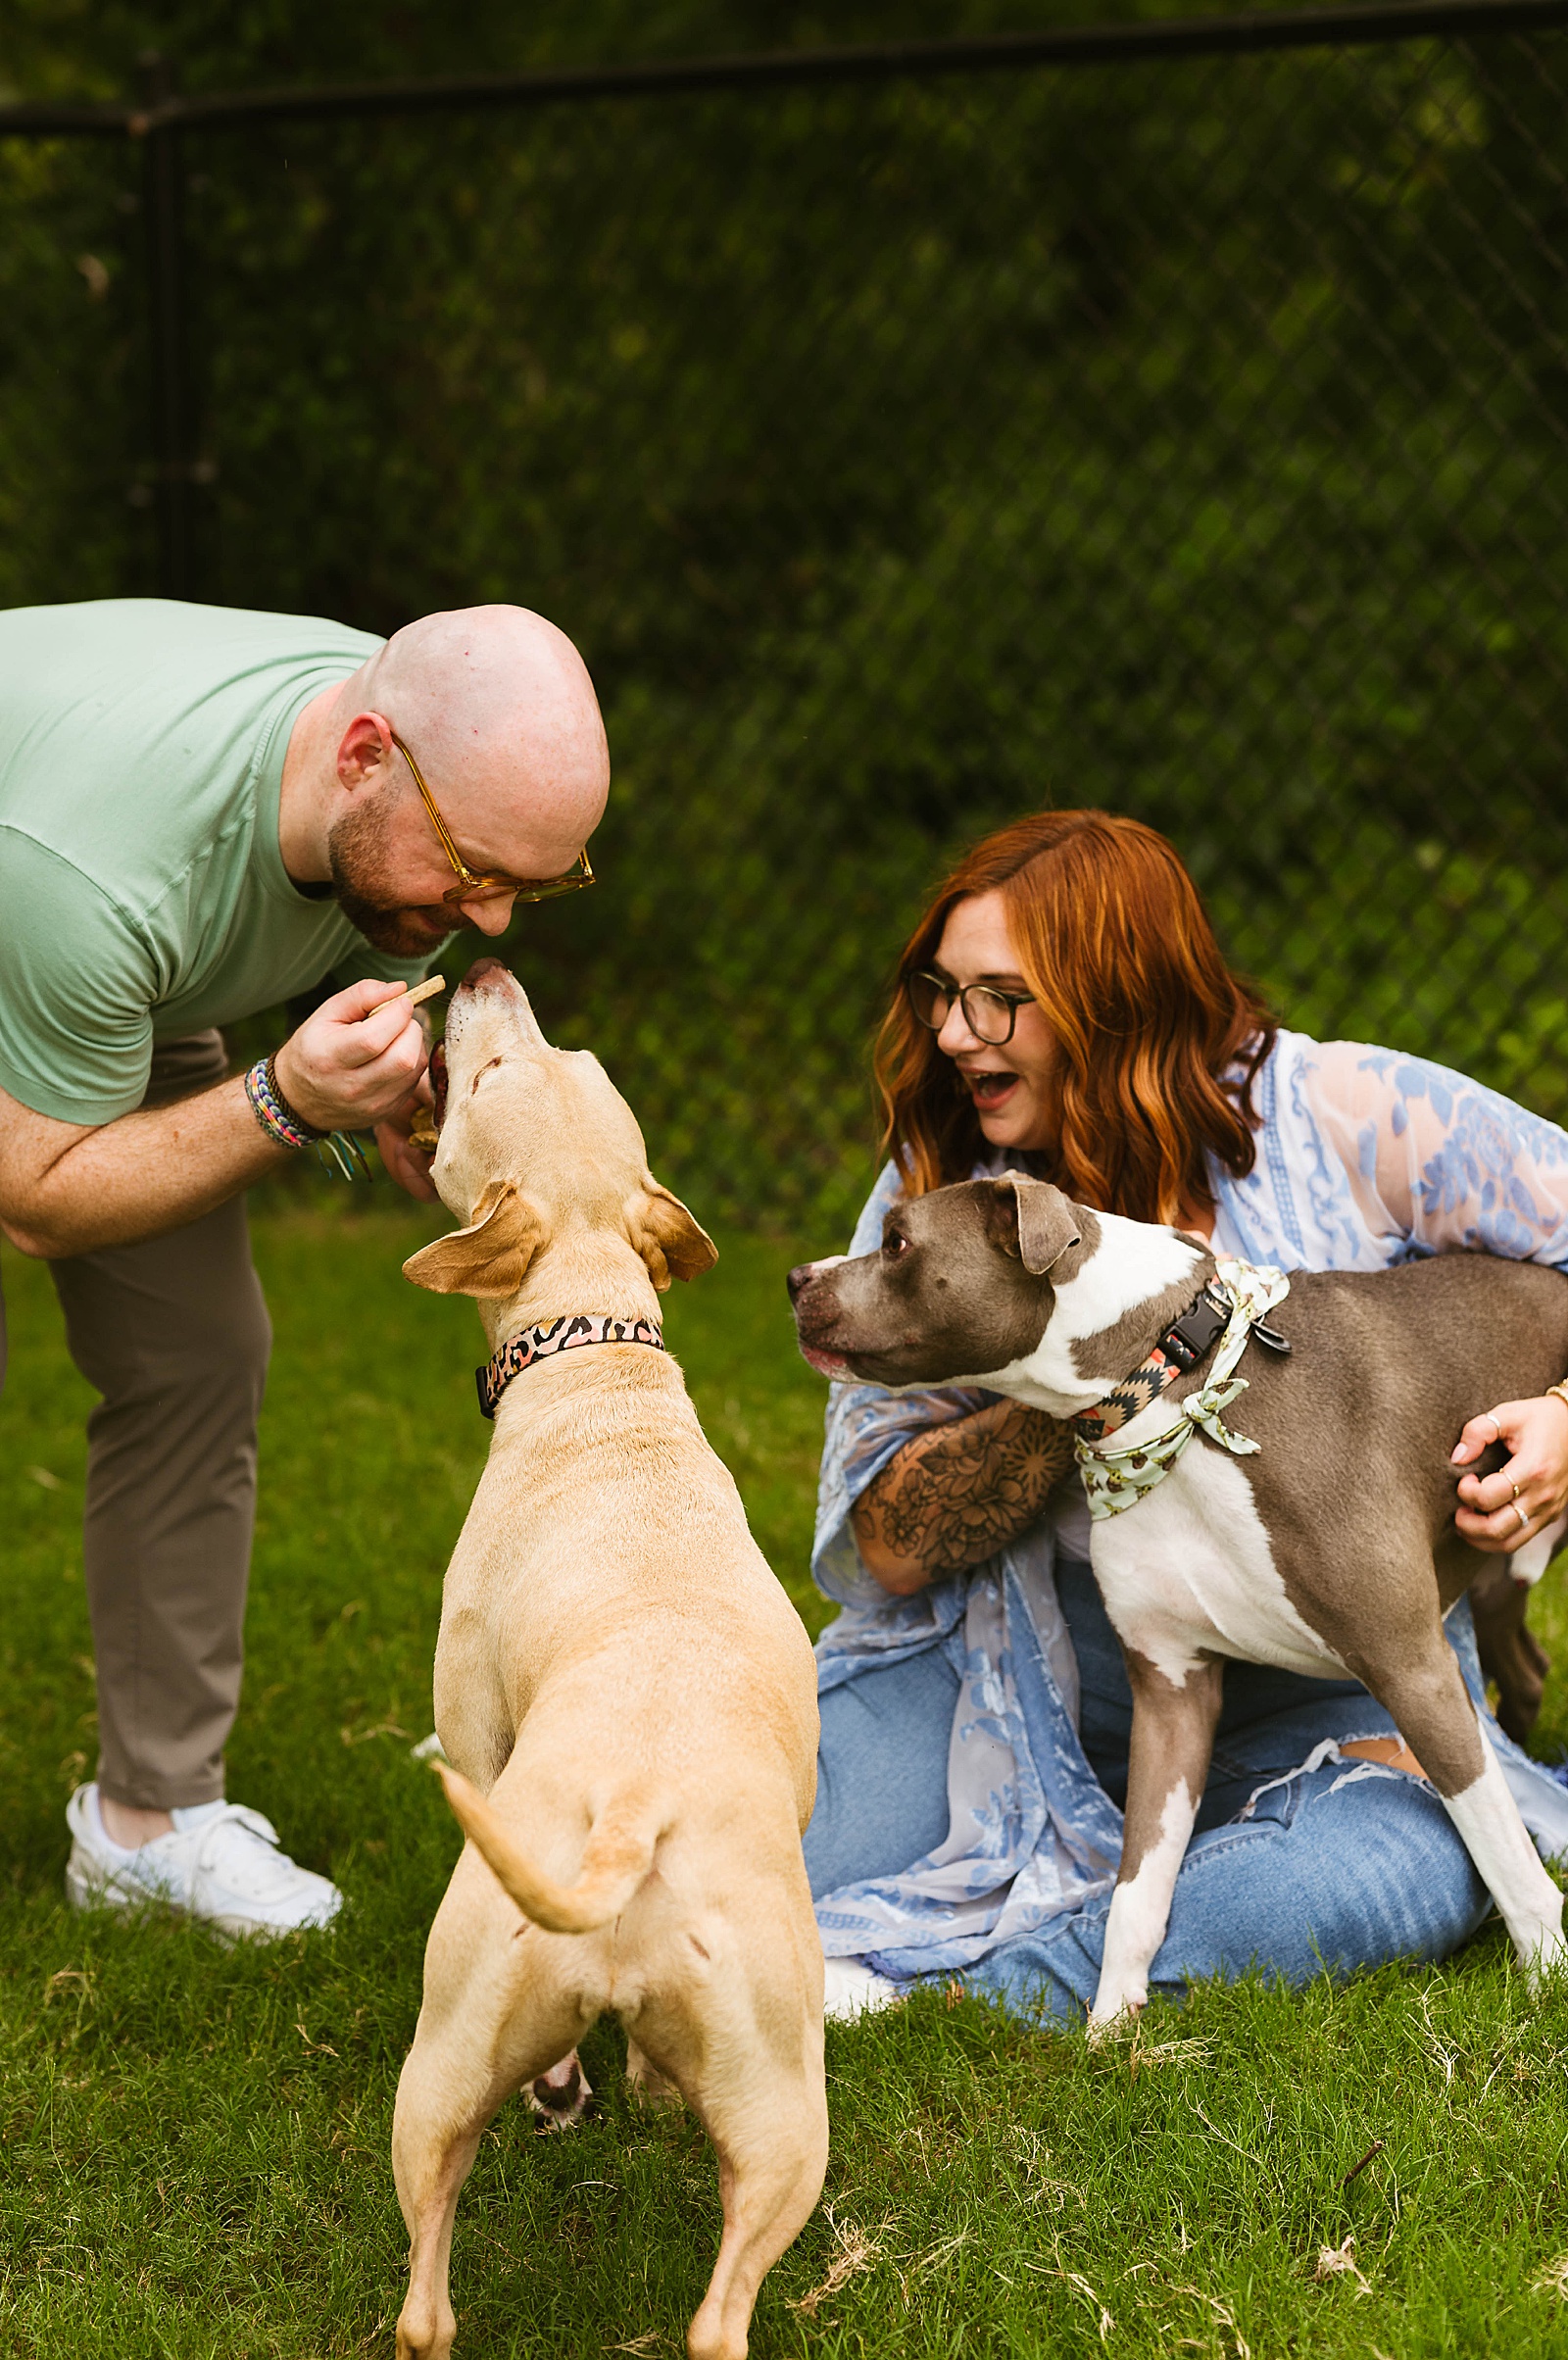 Man and woman playing with their dogs in park for photo shoot with pups